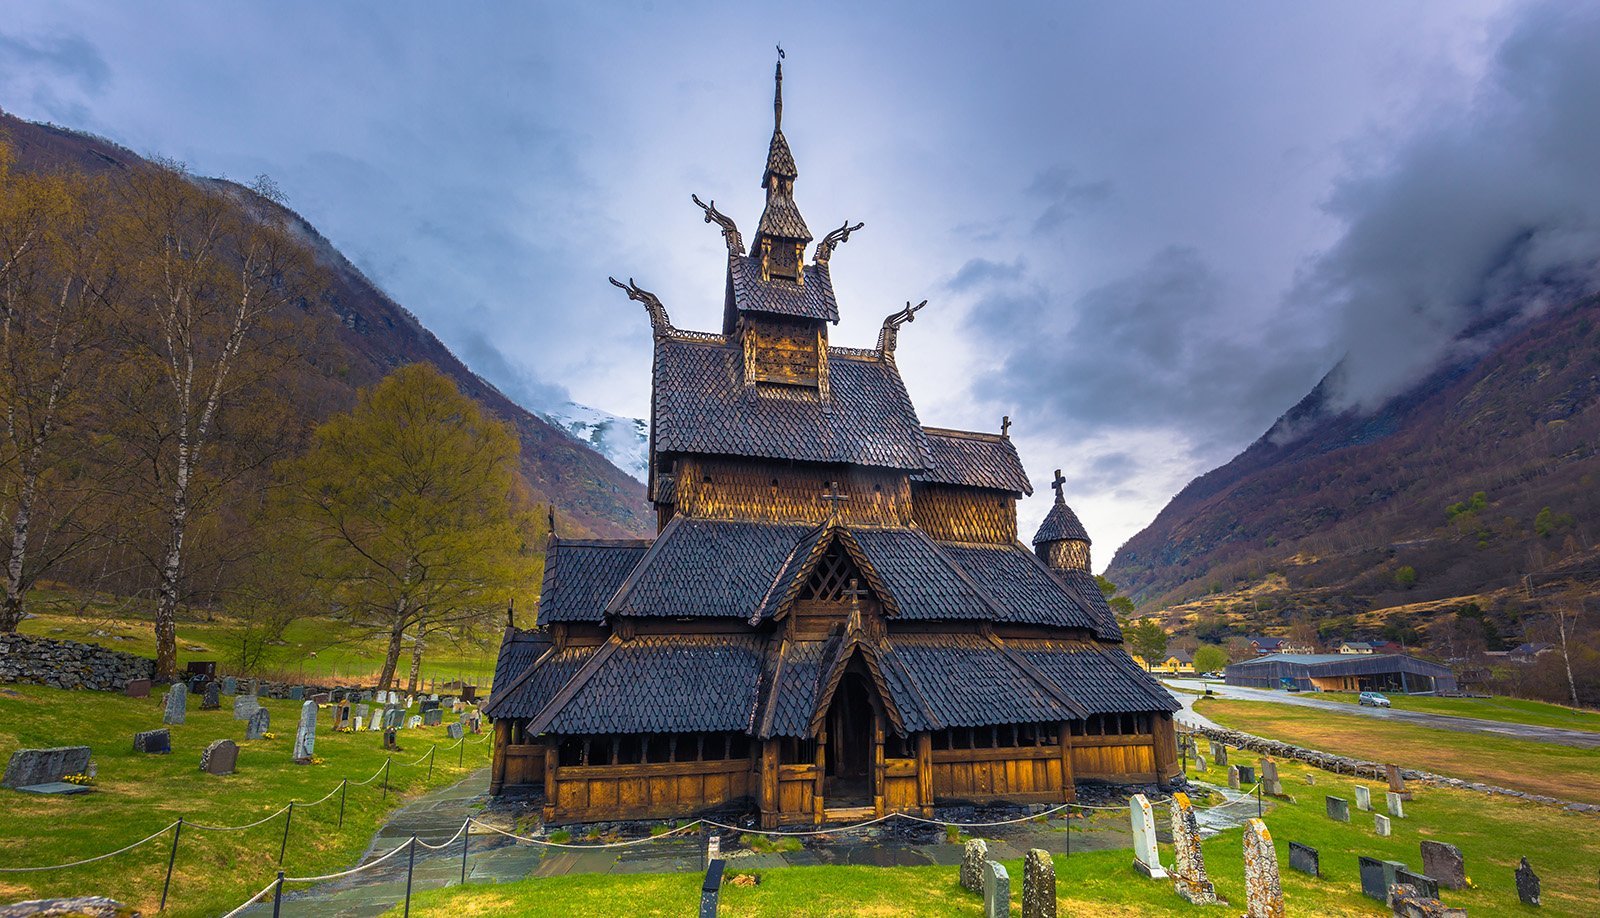 The spectacular exterior of Borgund Stave Church in Norway